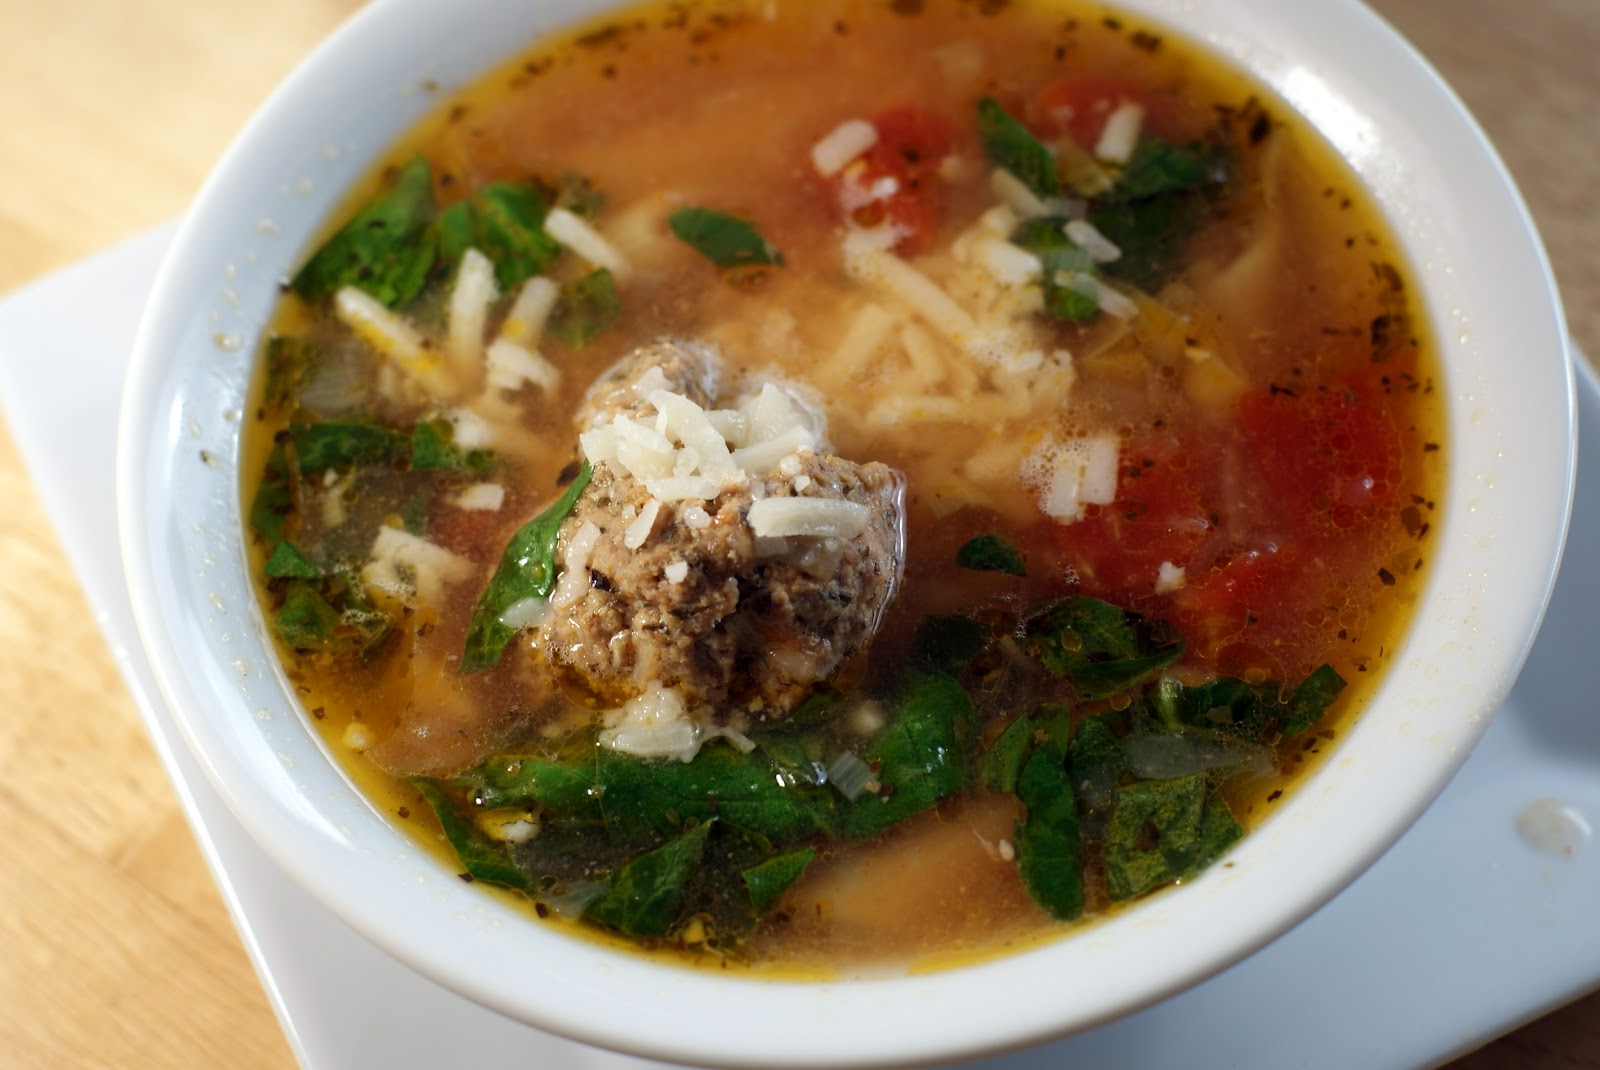 The Merlin Menu: Meatball Spinach Pasta Soup